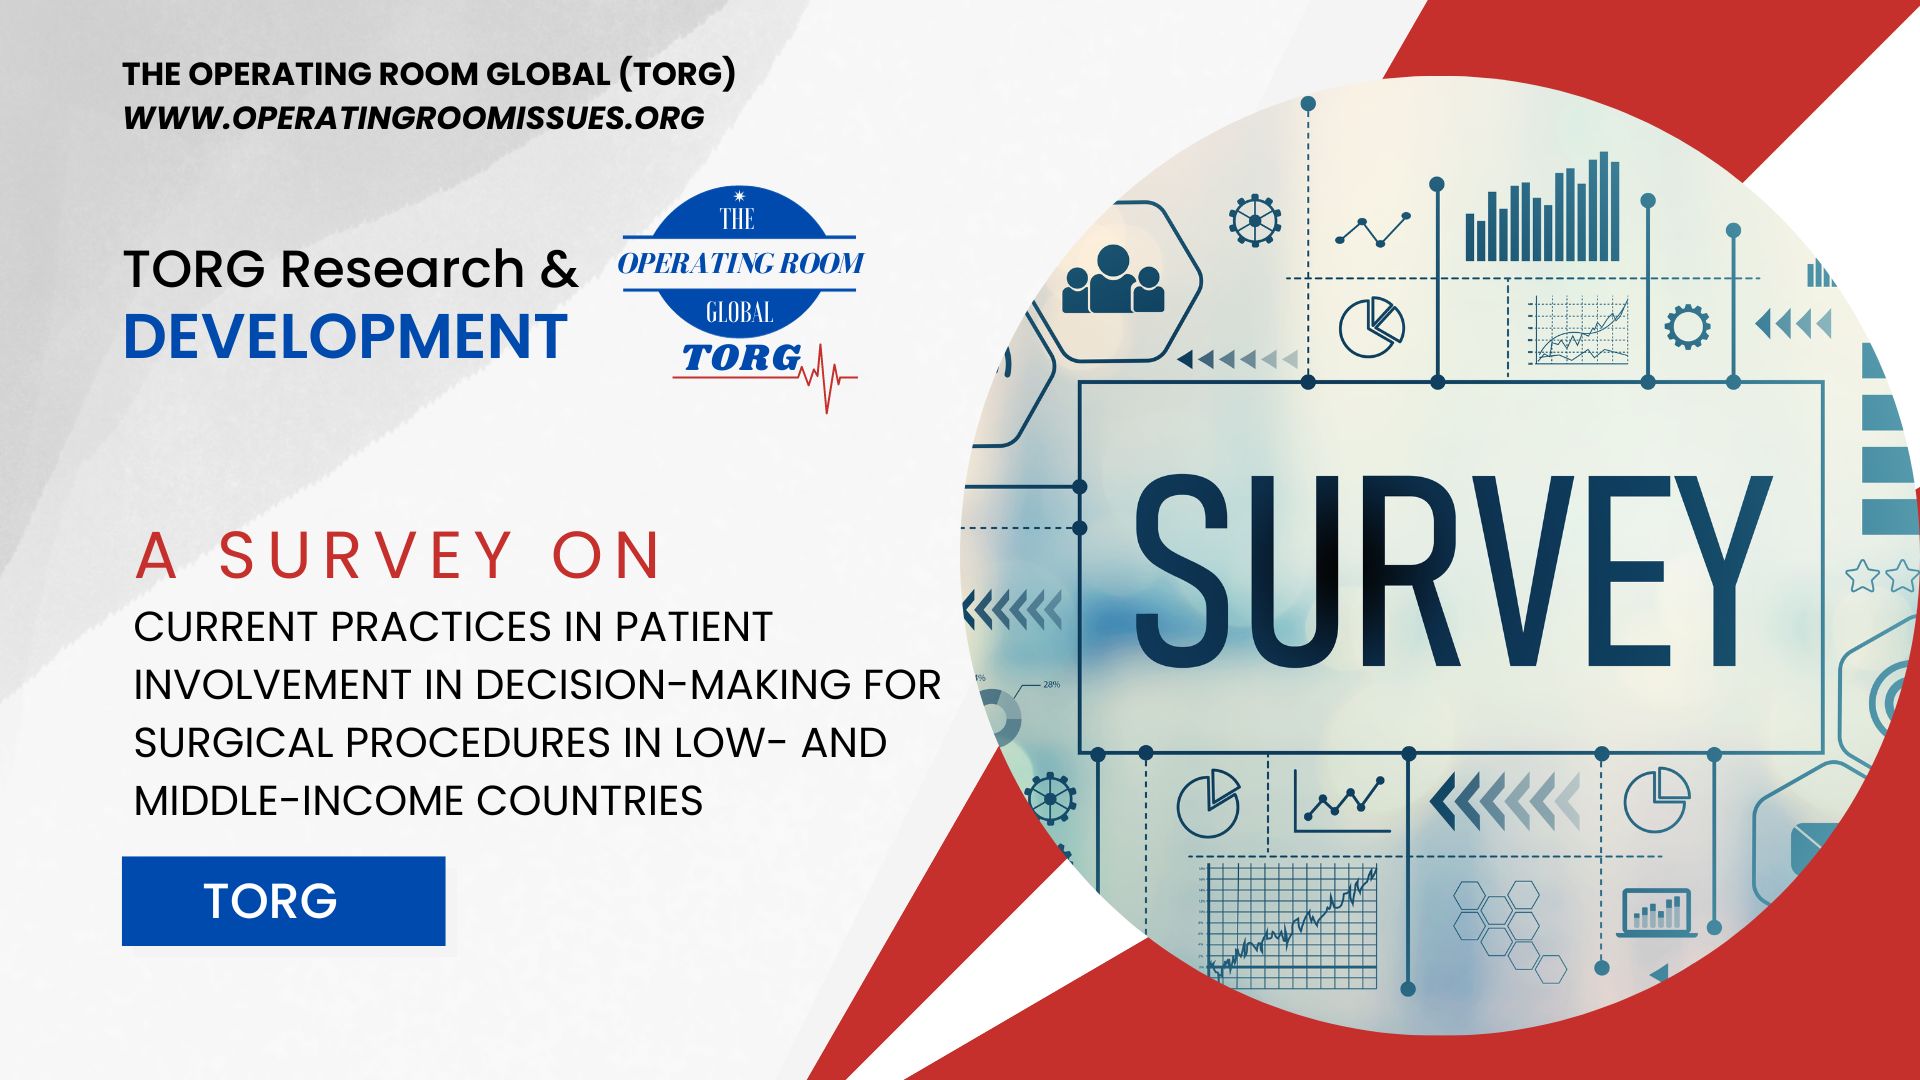 You are Invited – A Survey on Current Practices in Patient Involvement in Decision-Making for Surgical Procedures in Low- and Middle-Income Countries